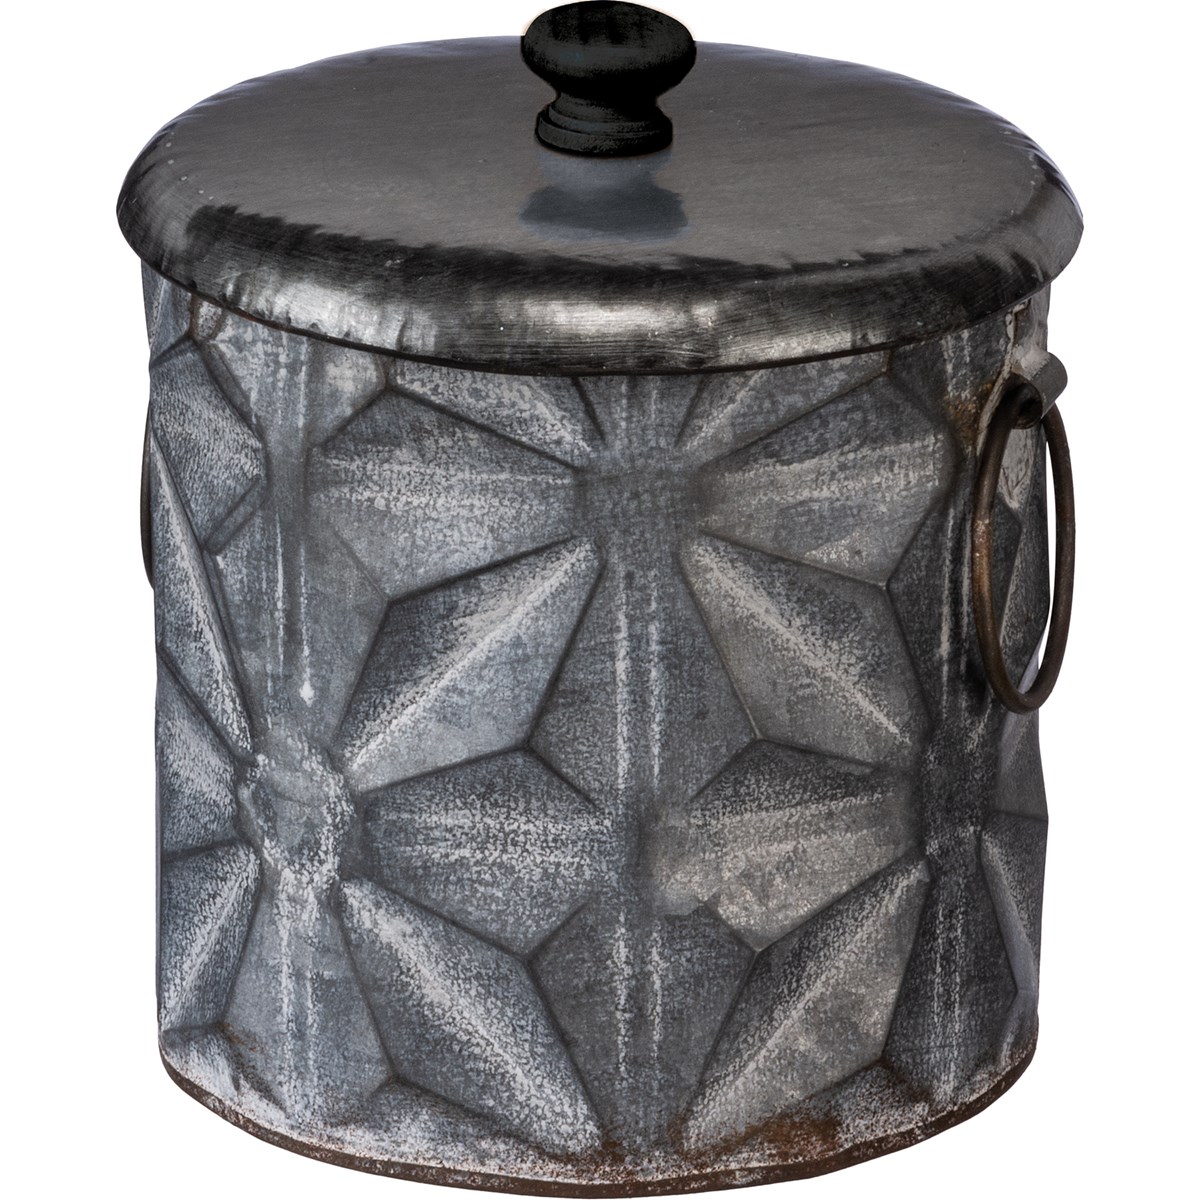 Star Pattern Canister Set - Metal, Wood